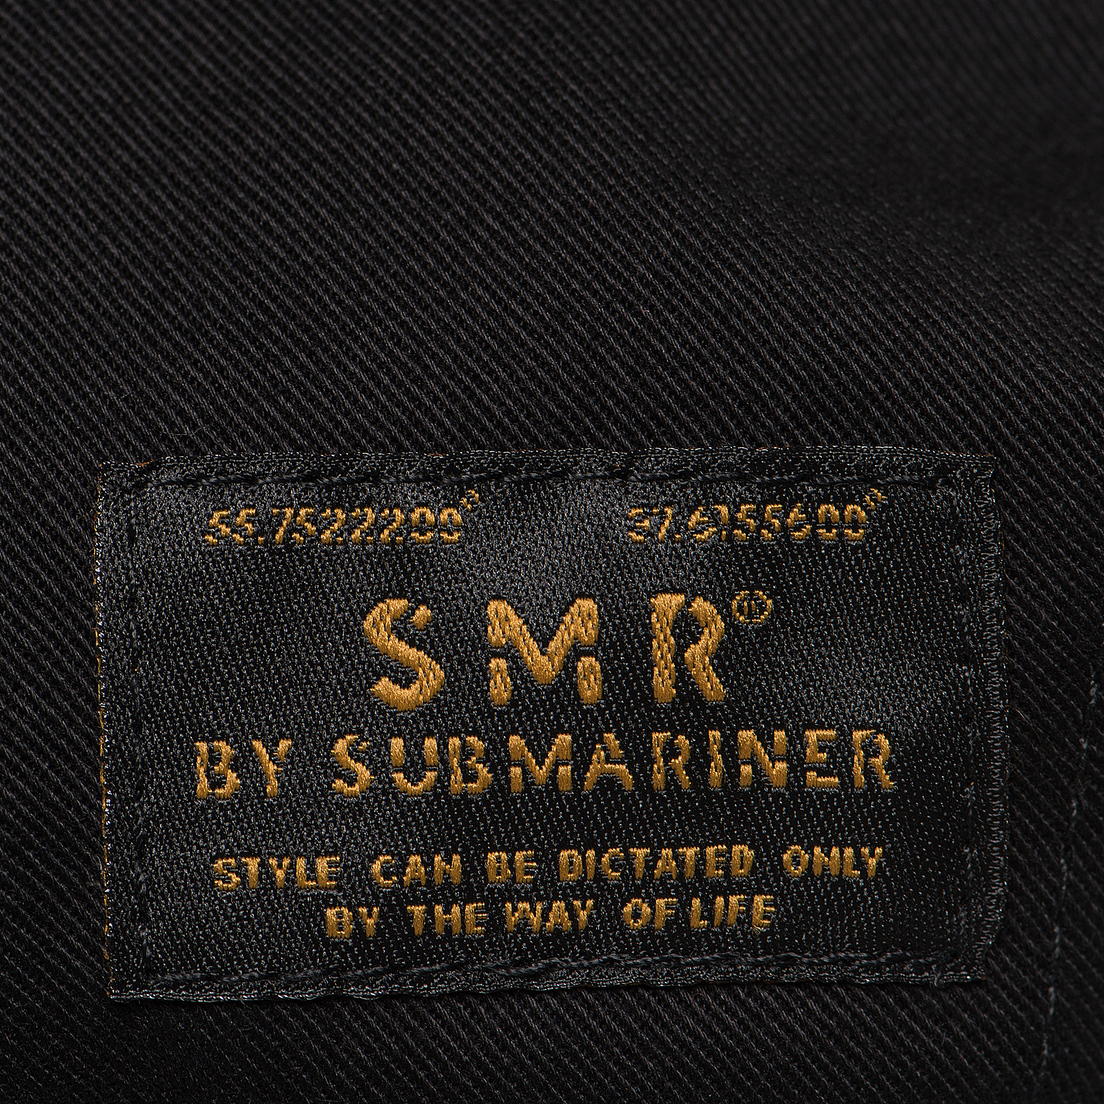 Submariner Кепка Embroidered Logo S